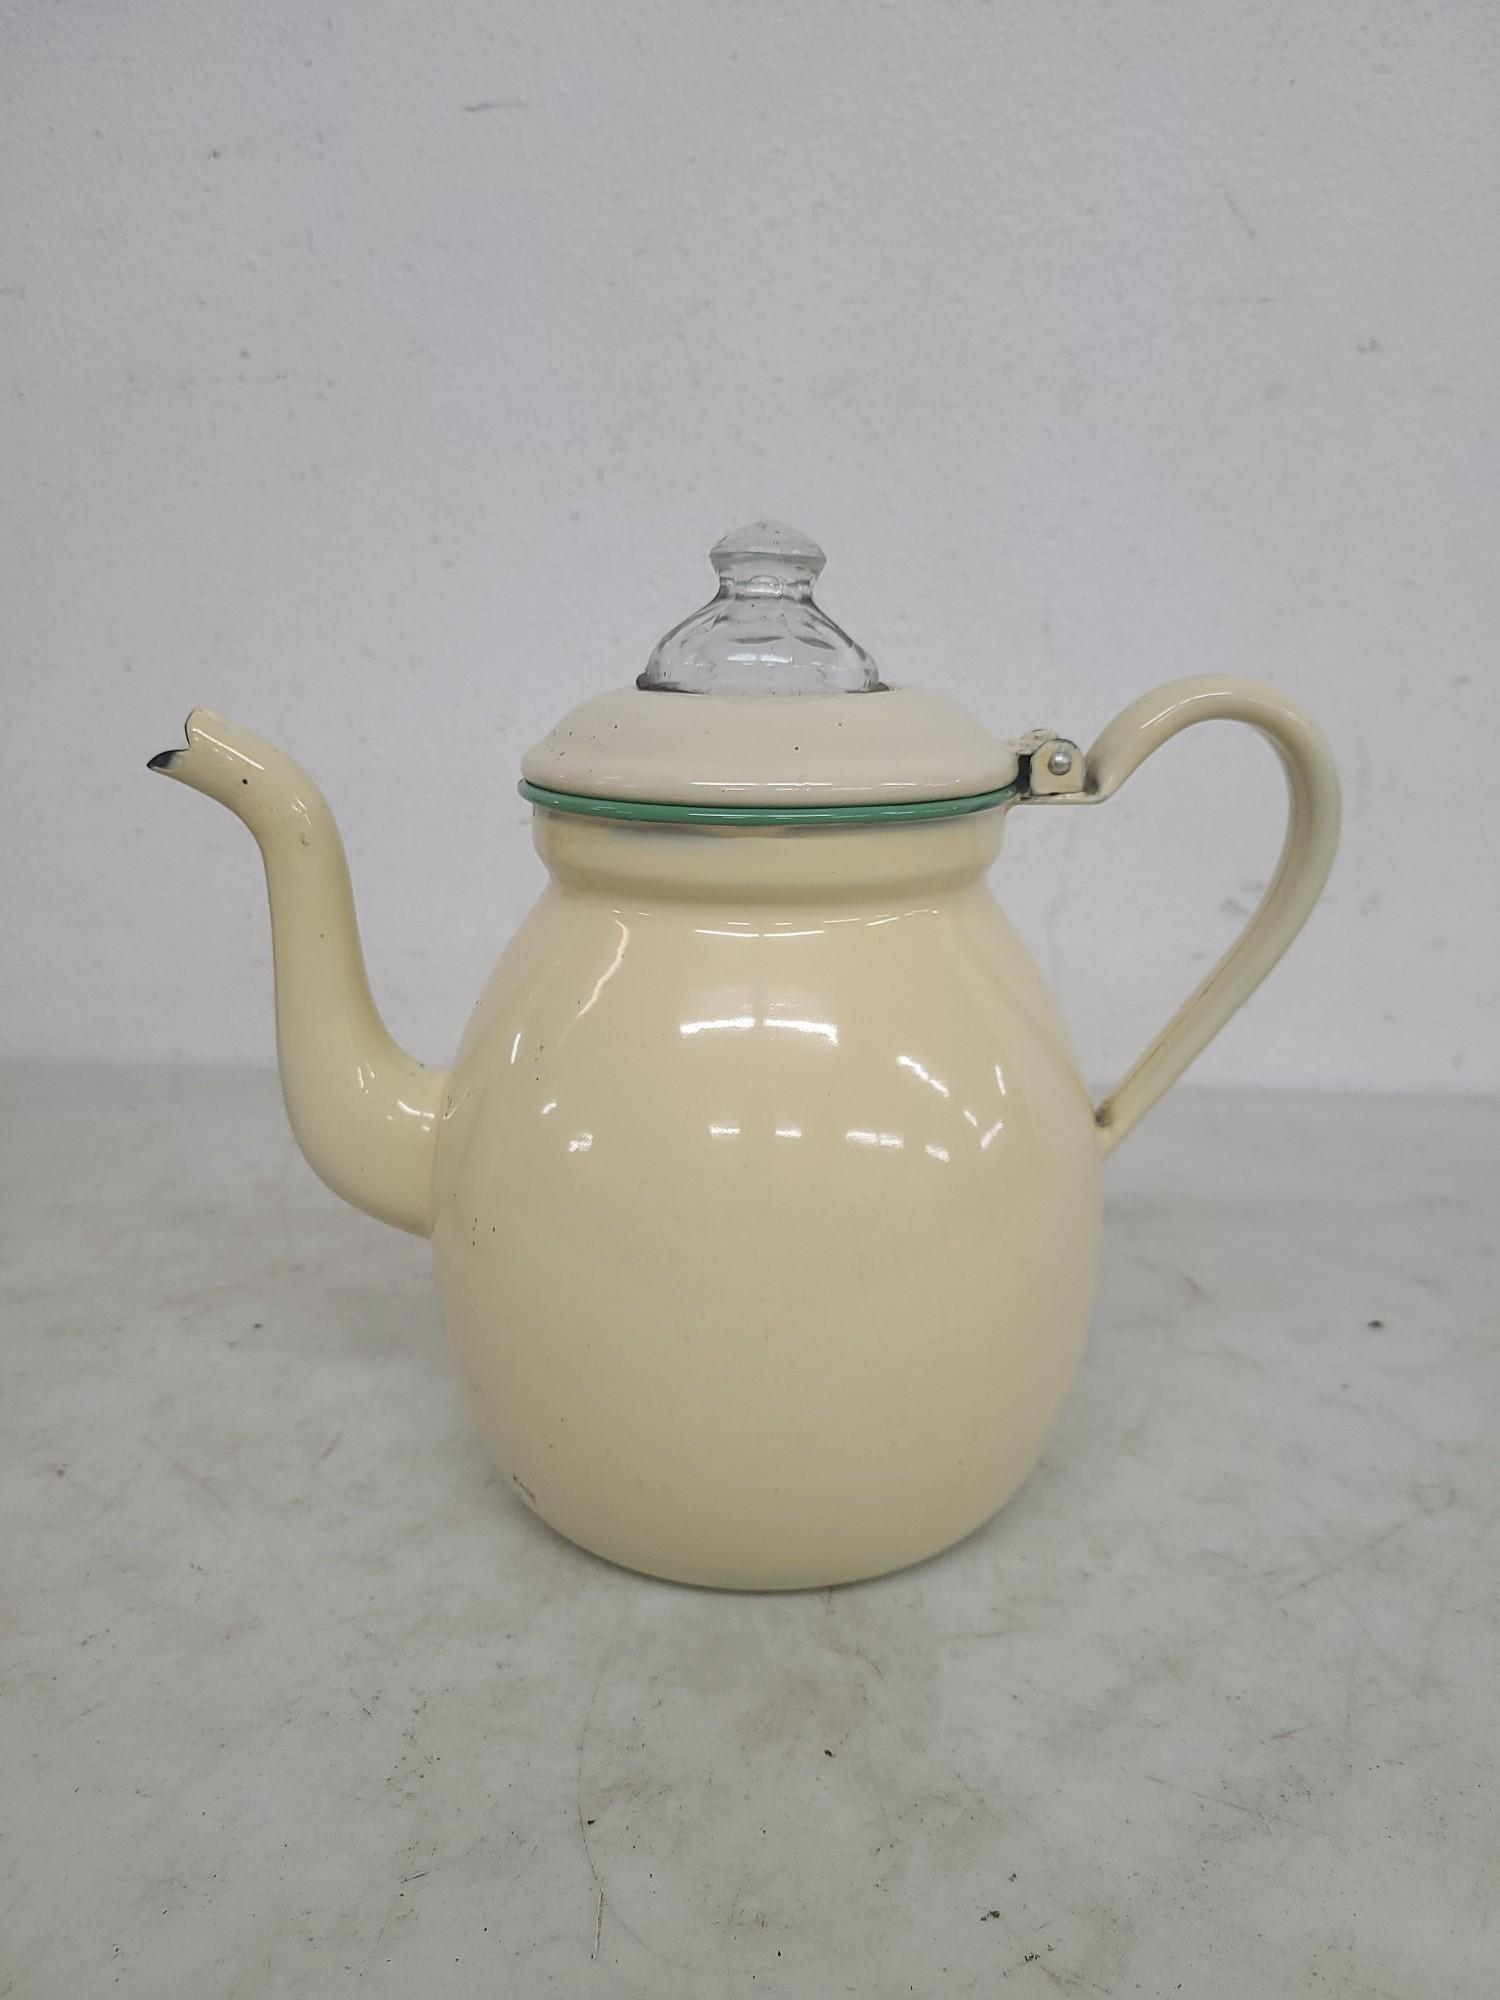 Cream Colored Enamelware Coffee Pot And Teapot